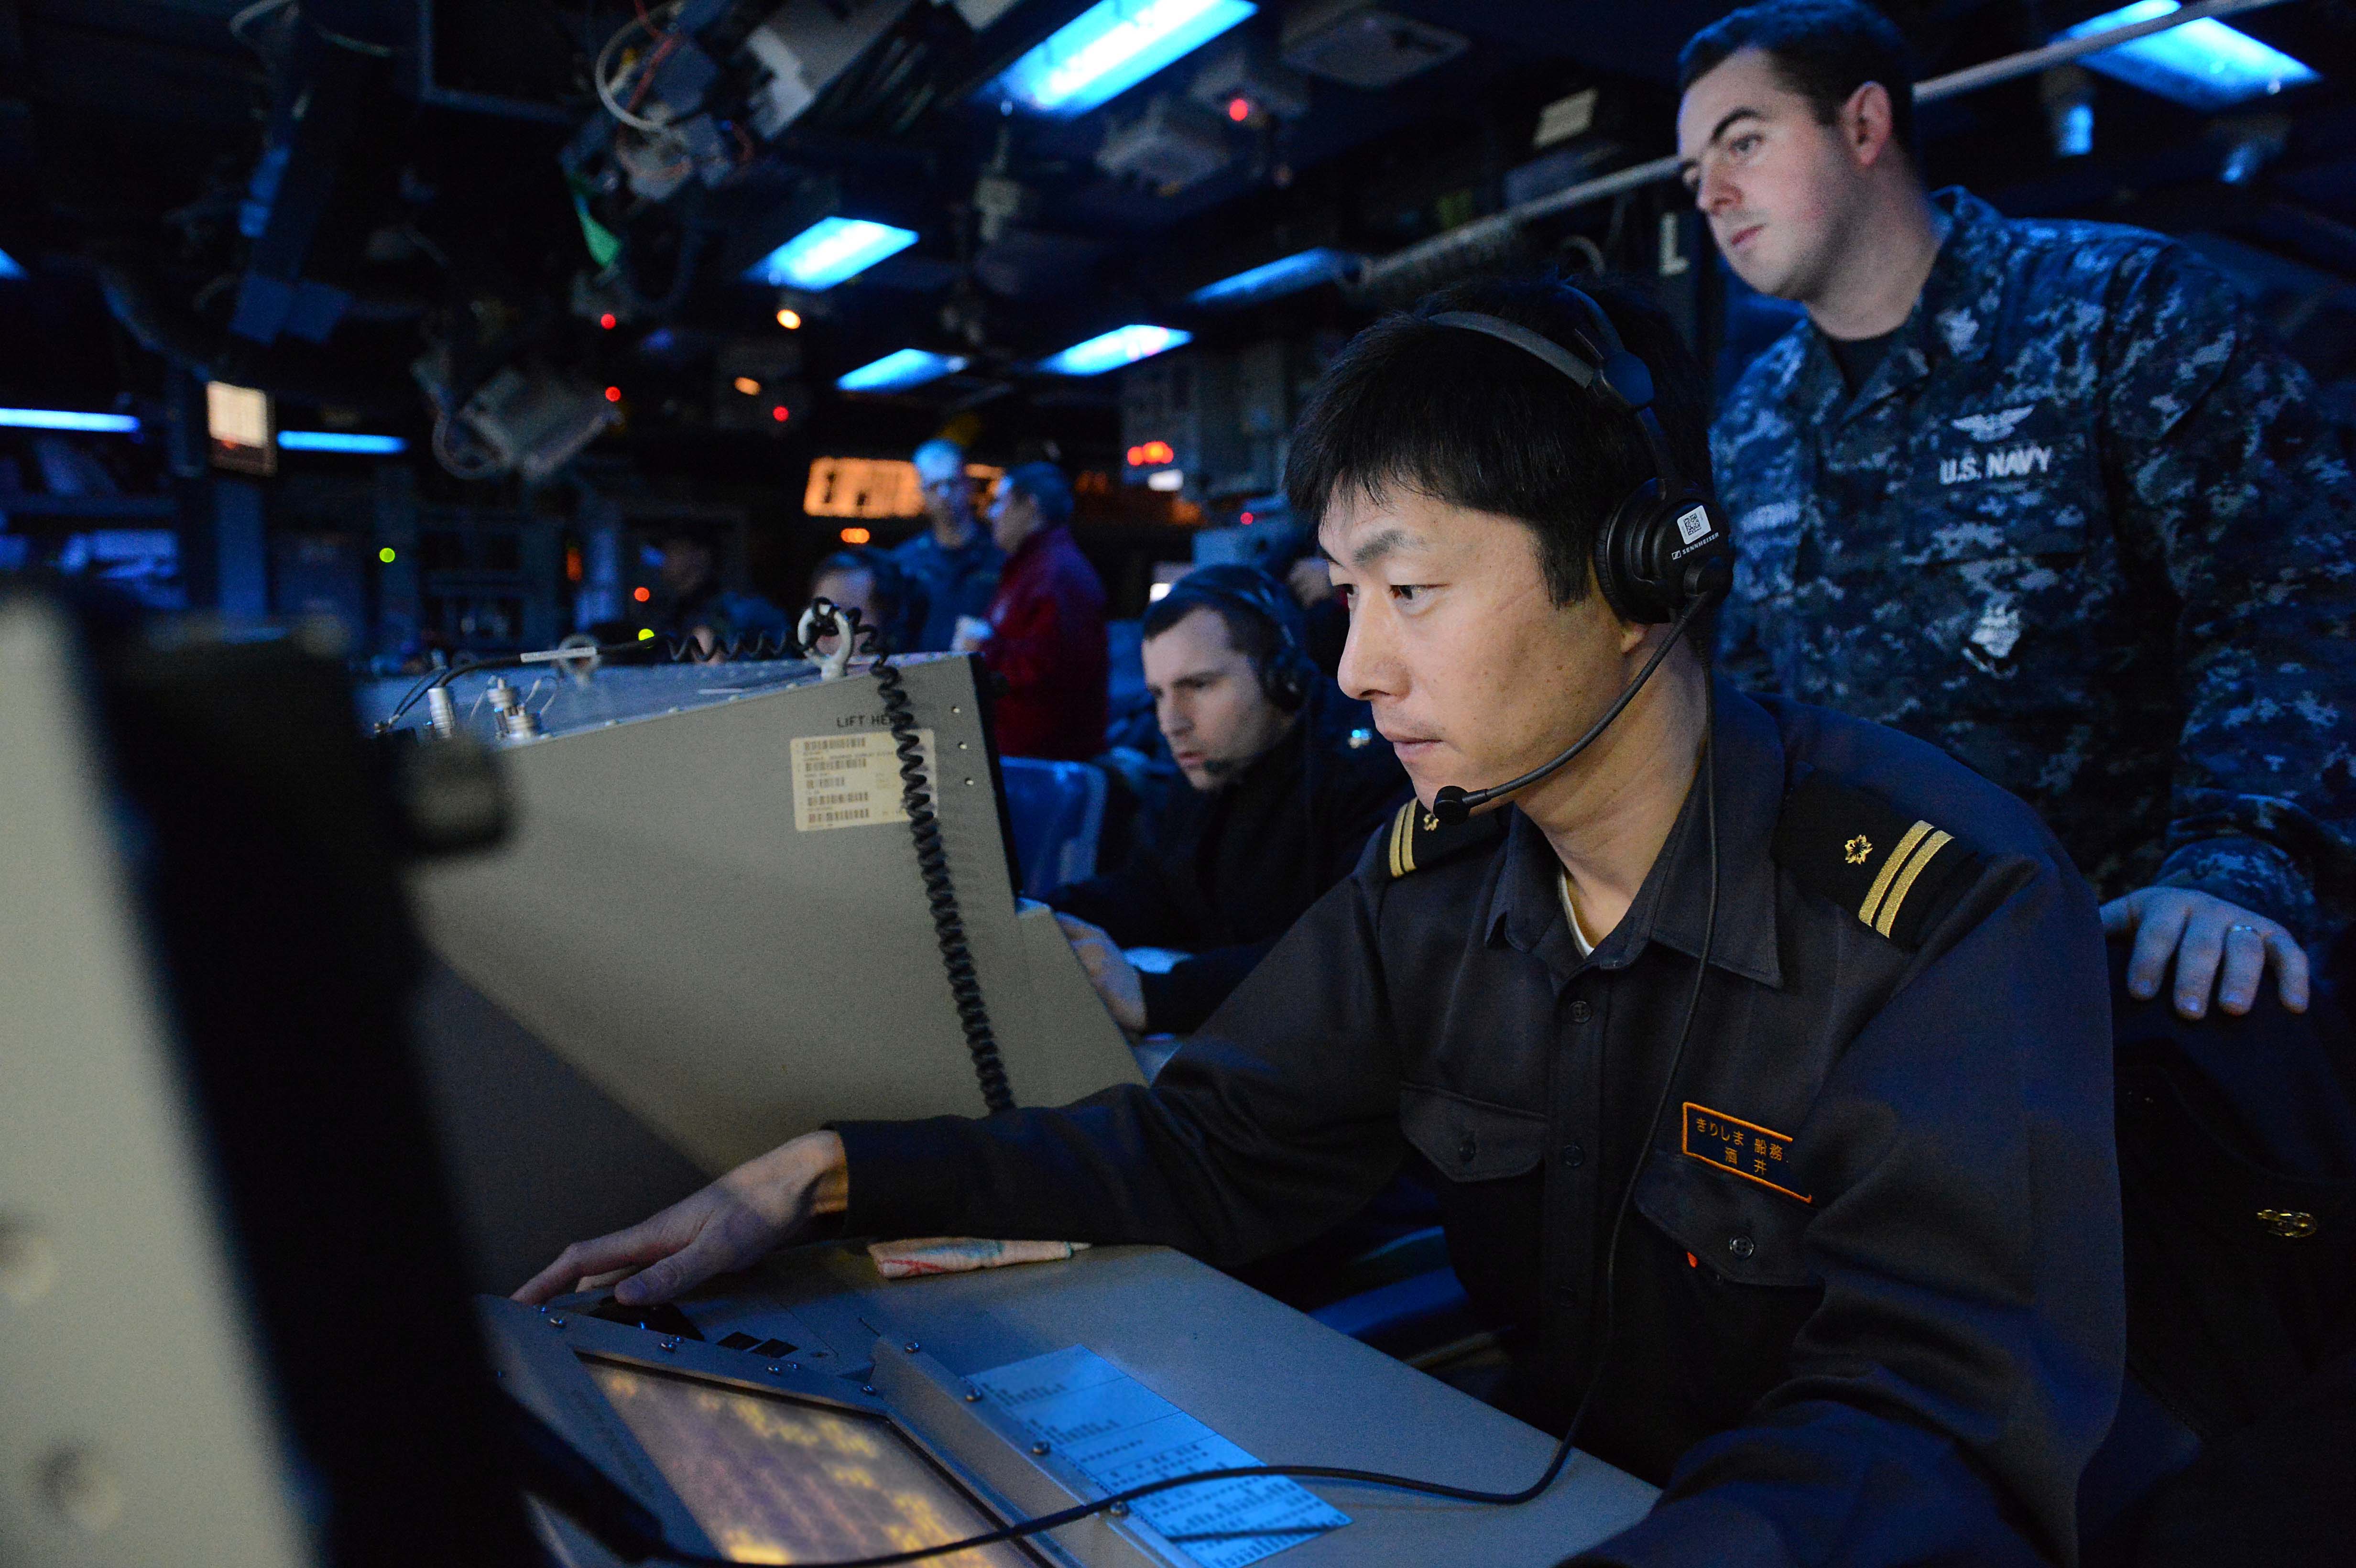 A member of the Japan Maritime Self Defense Force works inside the combat operations center of the Ticonderoga-class guided-missile cruiser USS Antietam (CG 54) on Nov. 27, 2013. US Navy Photo